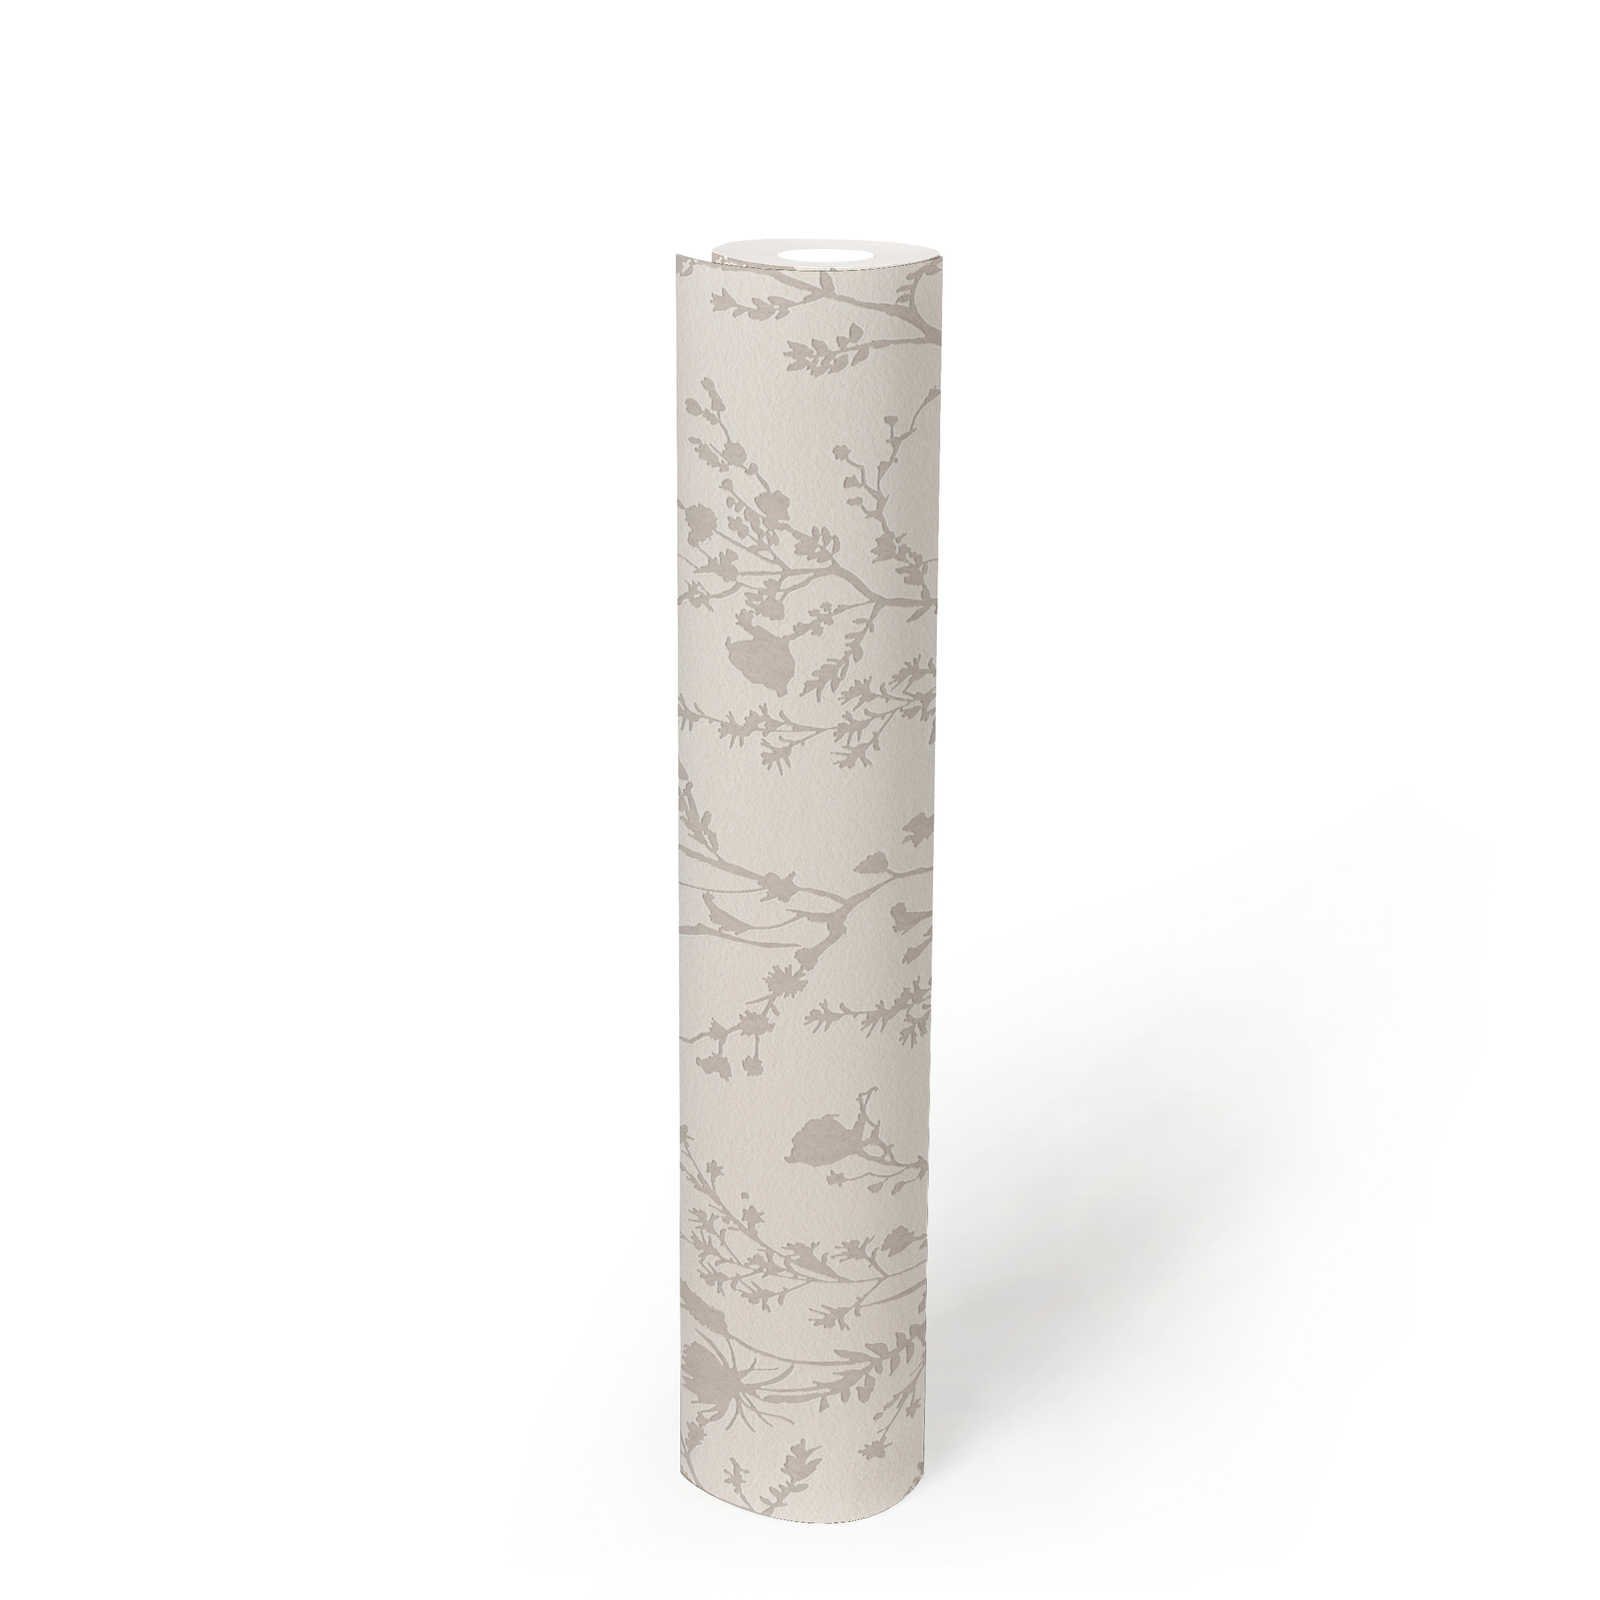             Non-woven wallpaper soft grasses and floral pattern - white, grey
        